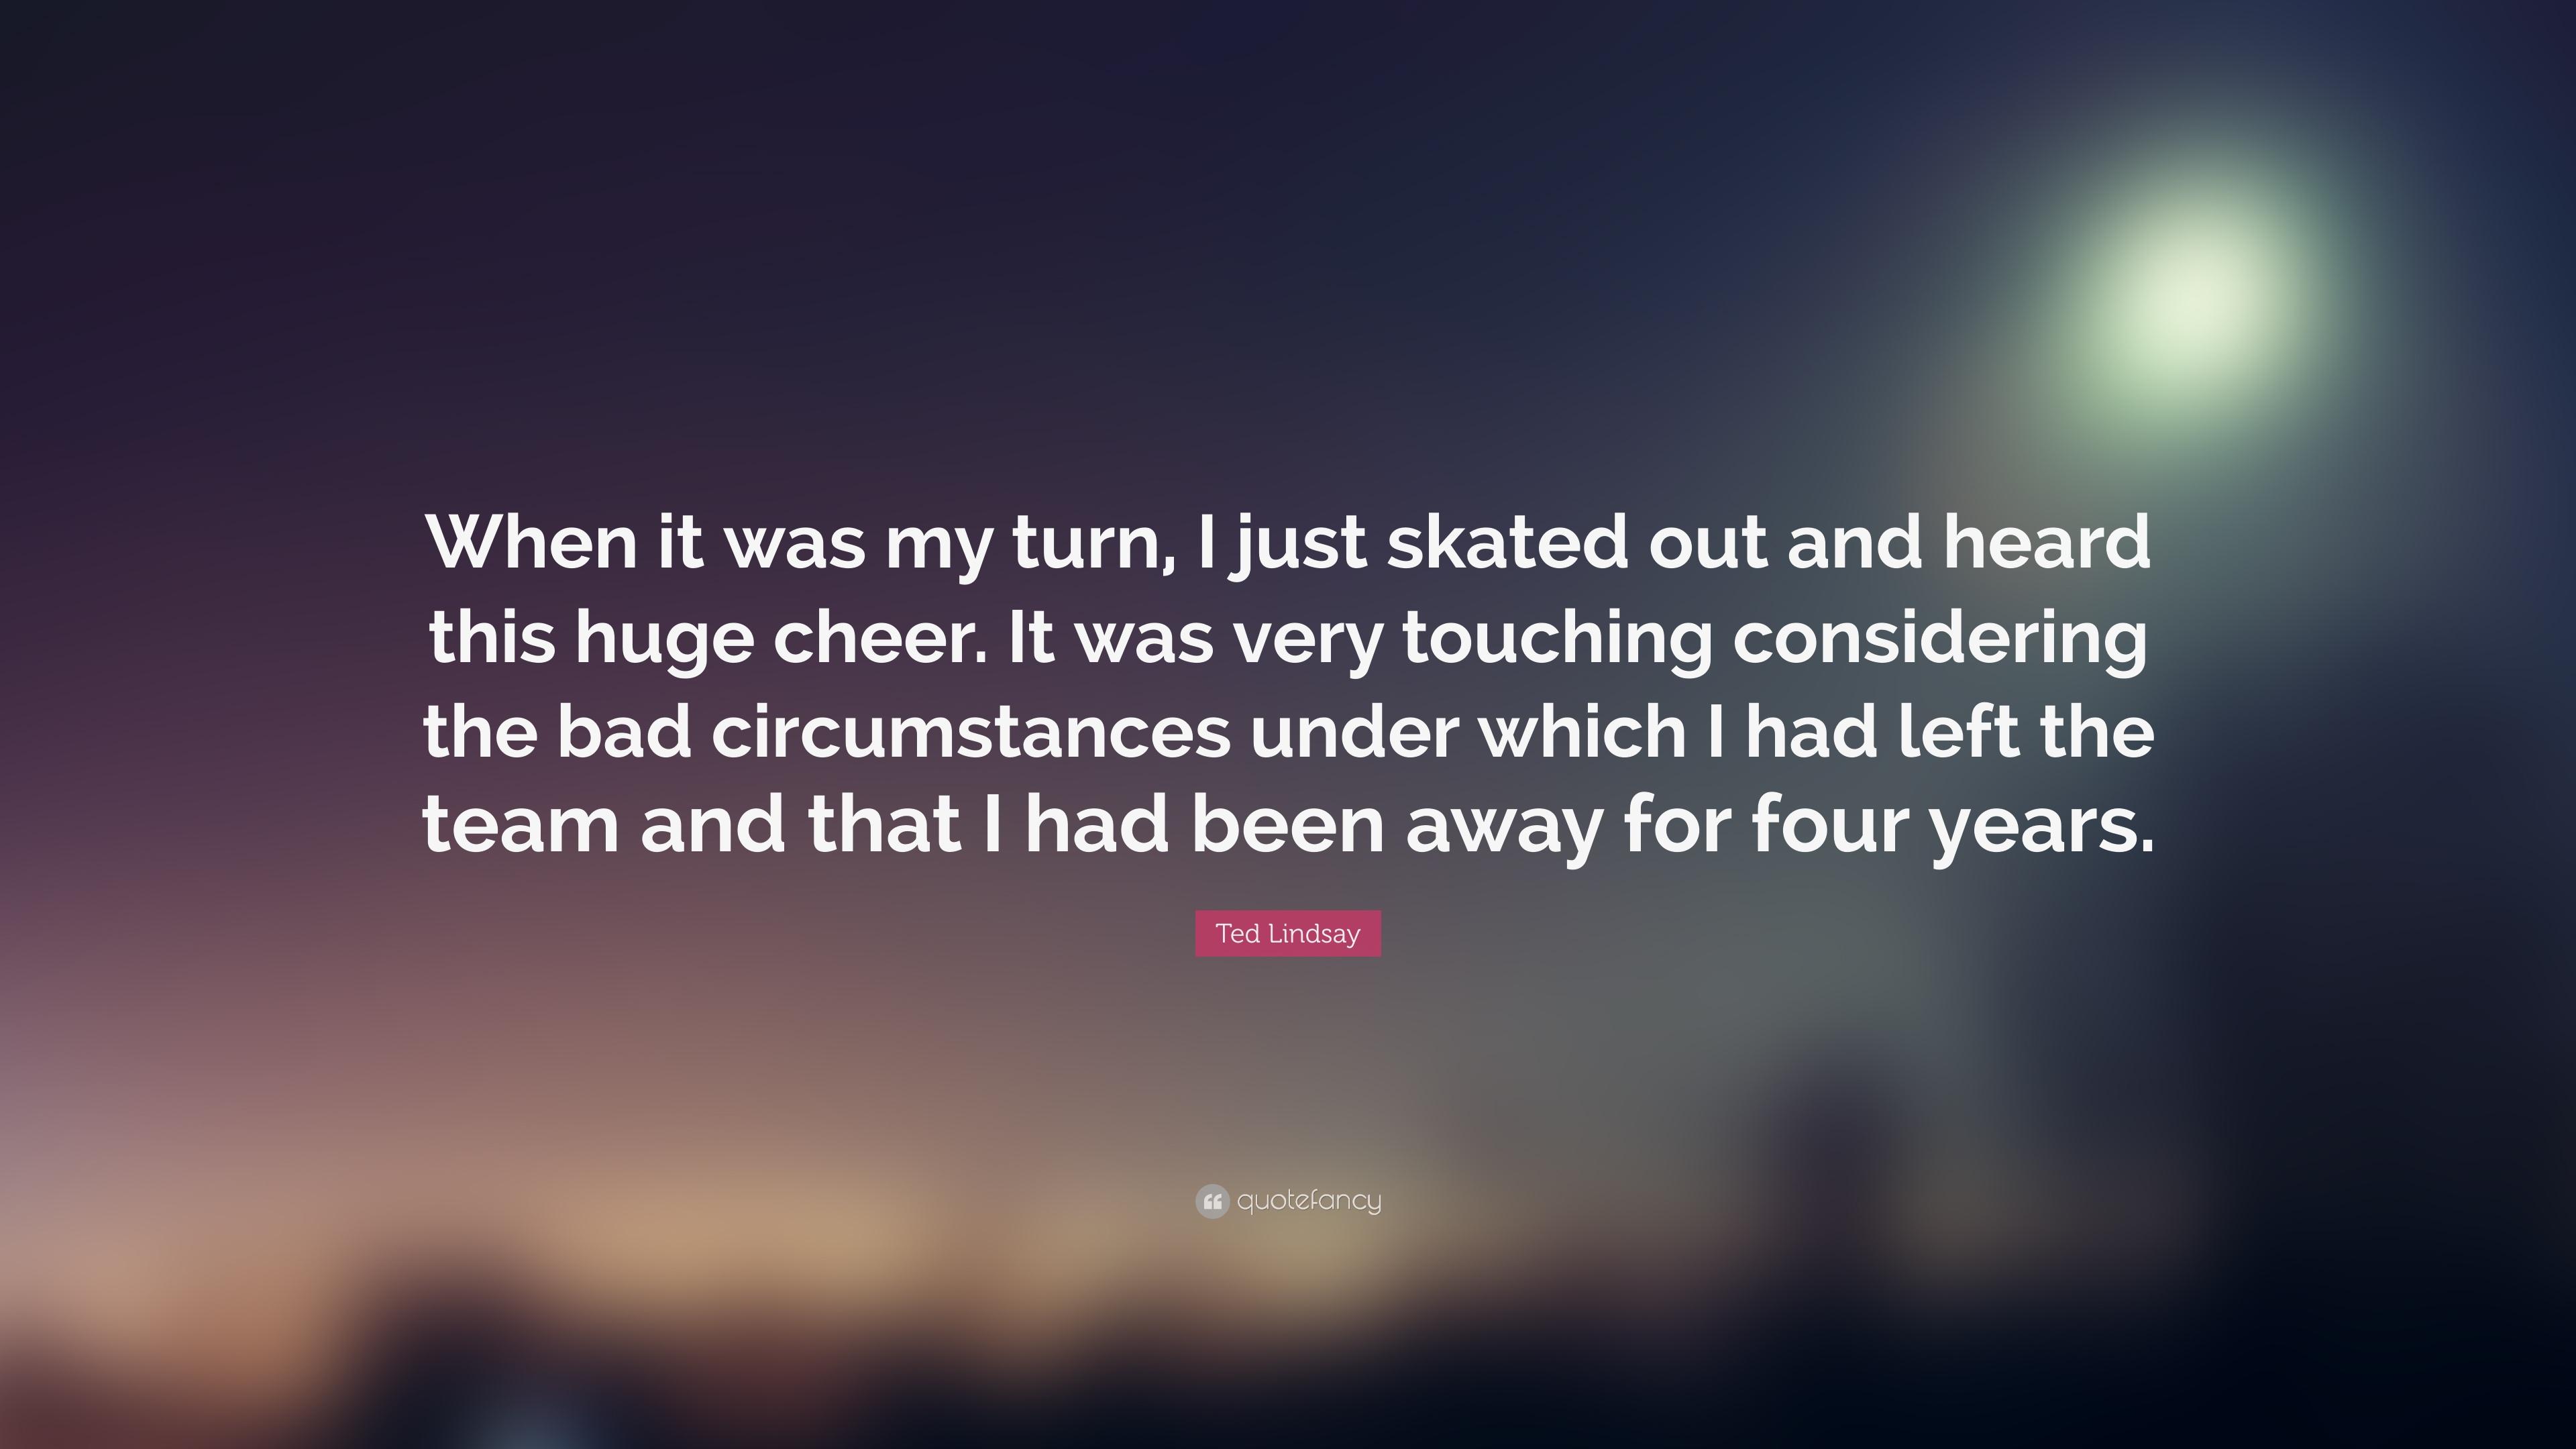 Ted Lindsay Quote: “When it was my turn, I just skated out and heard